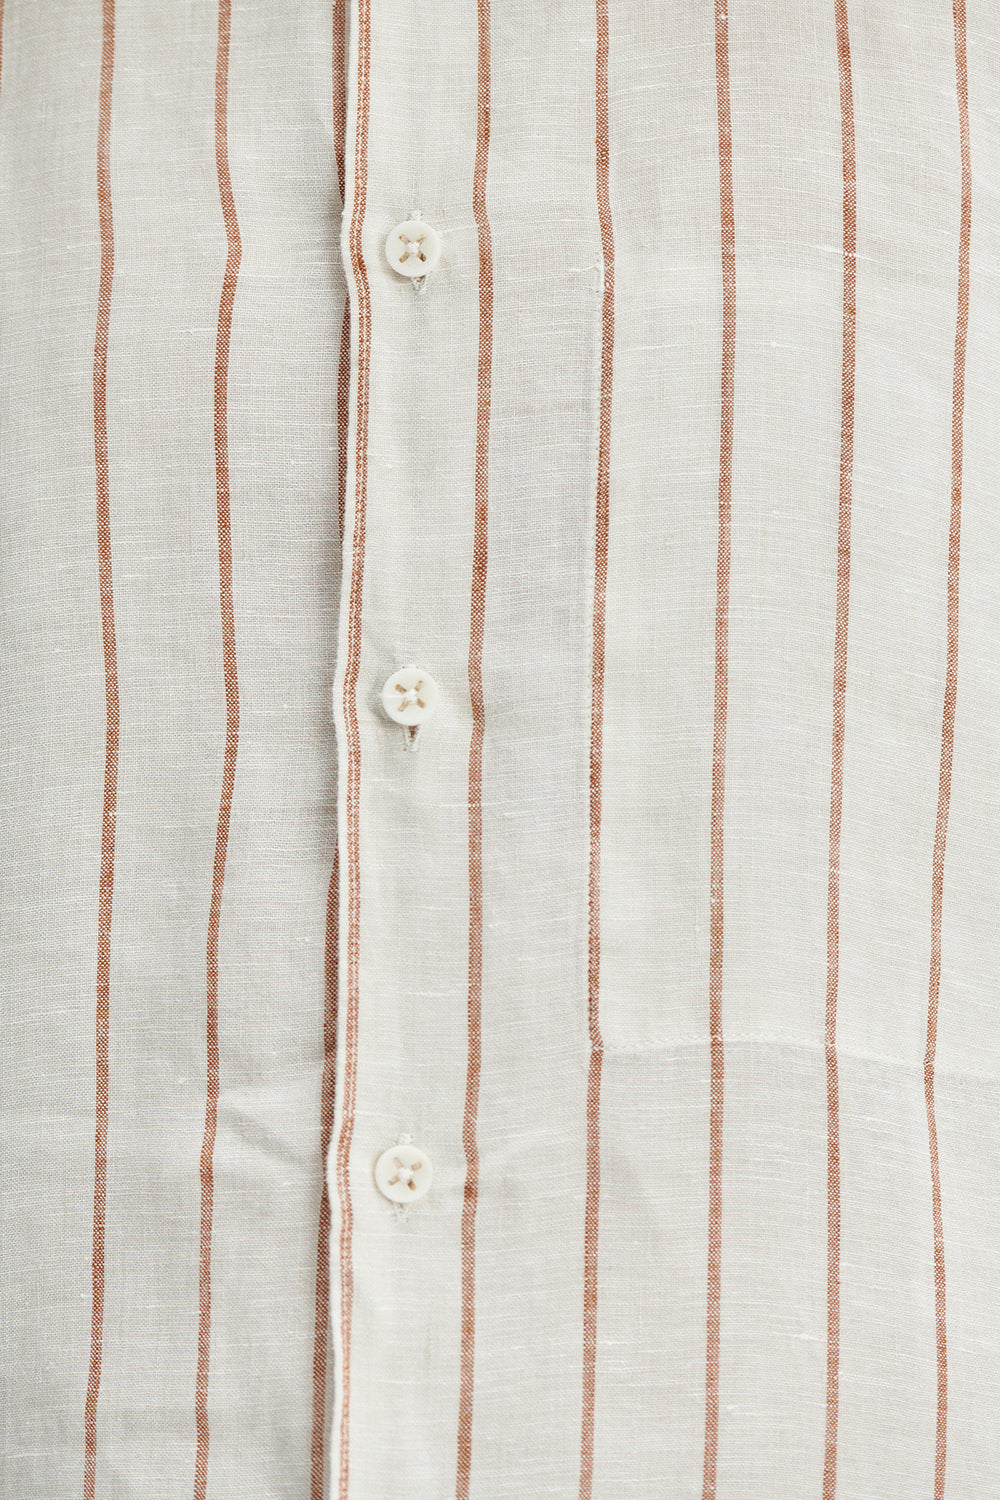 Feel Good Shirt in a Soft and Airy Striped Bohemian Linen